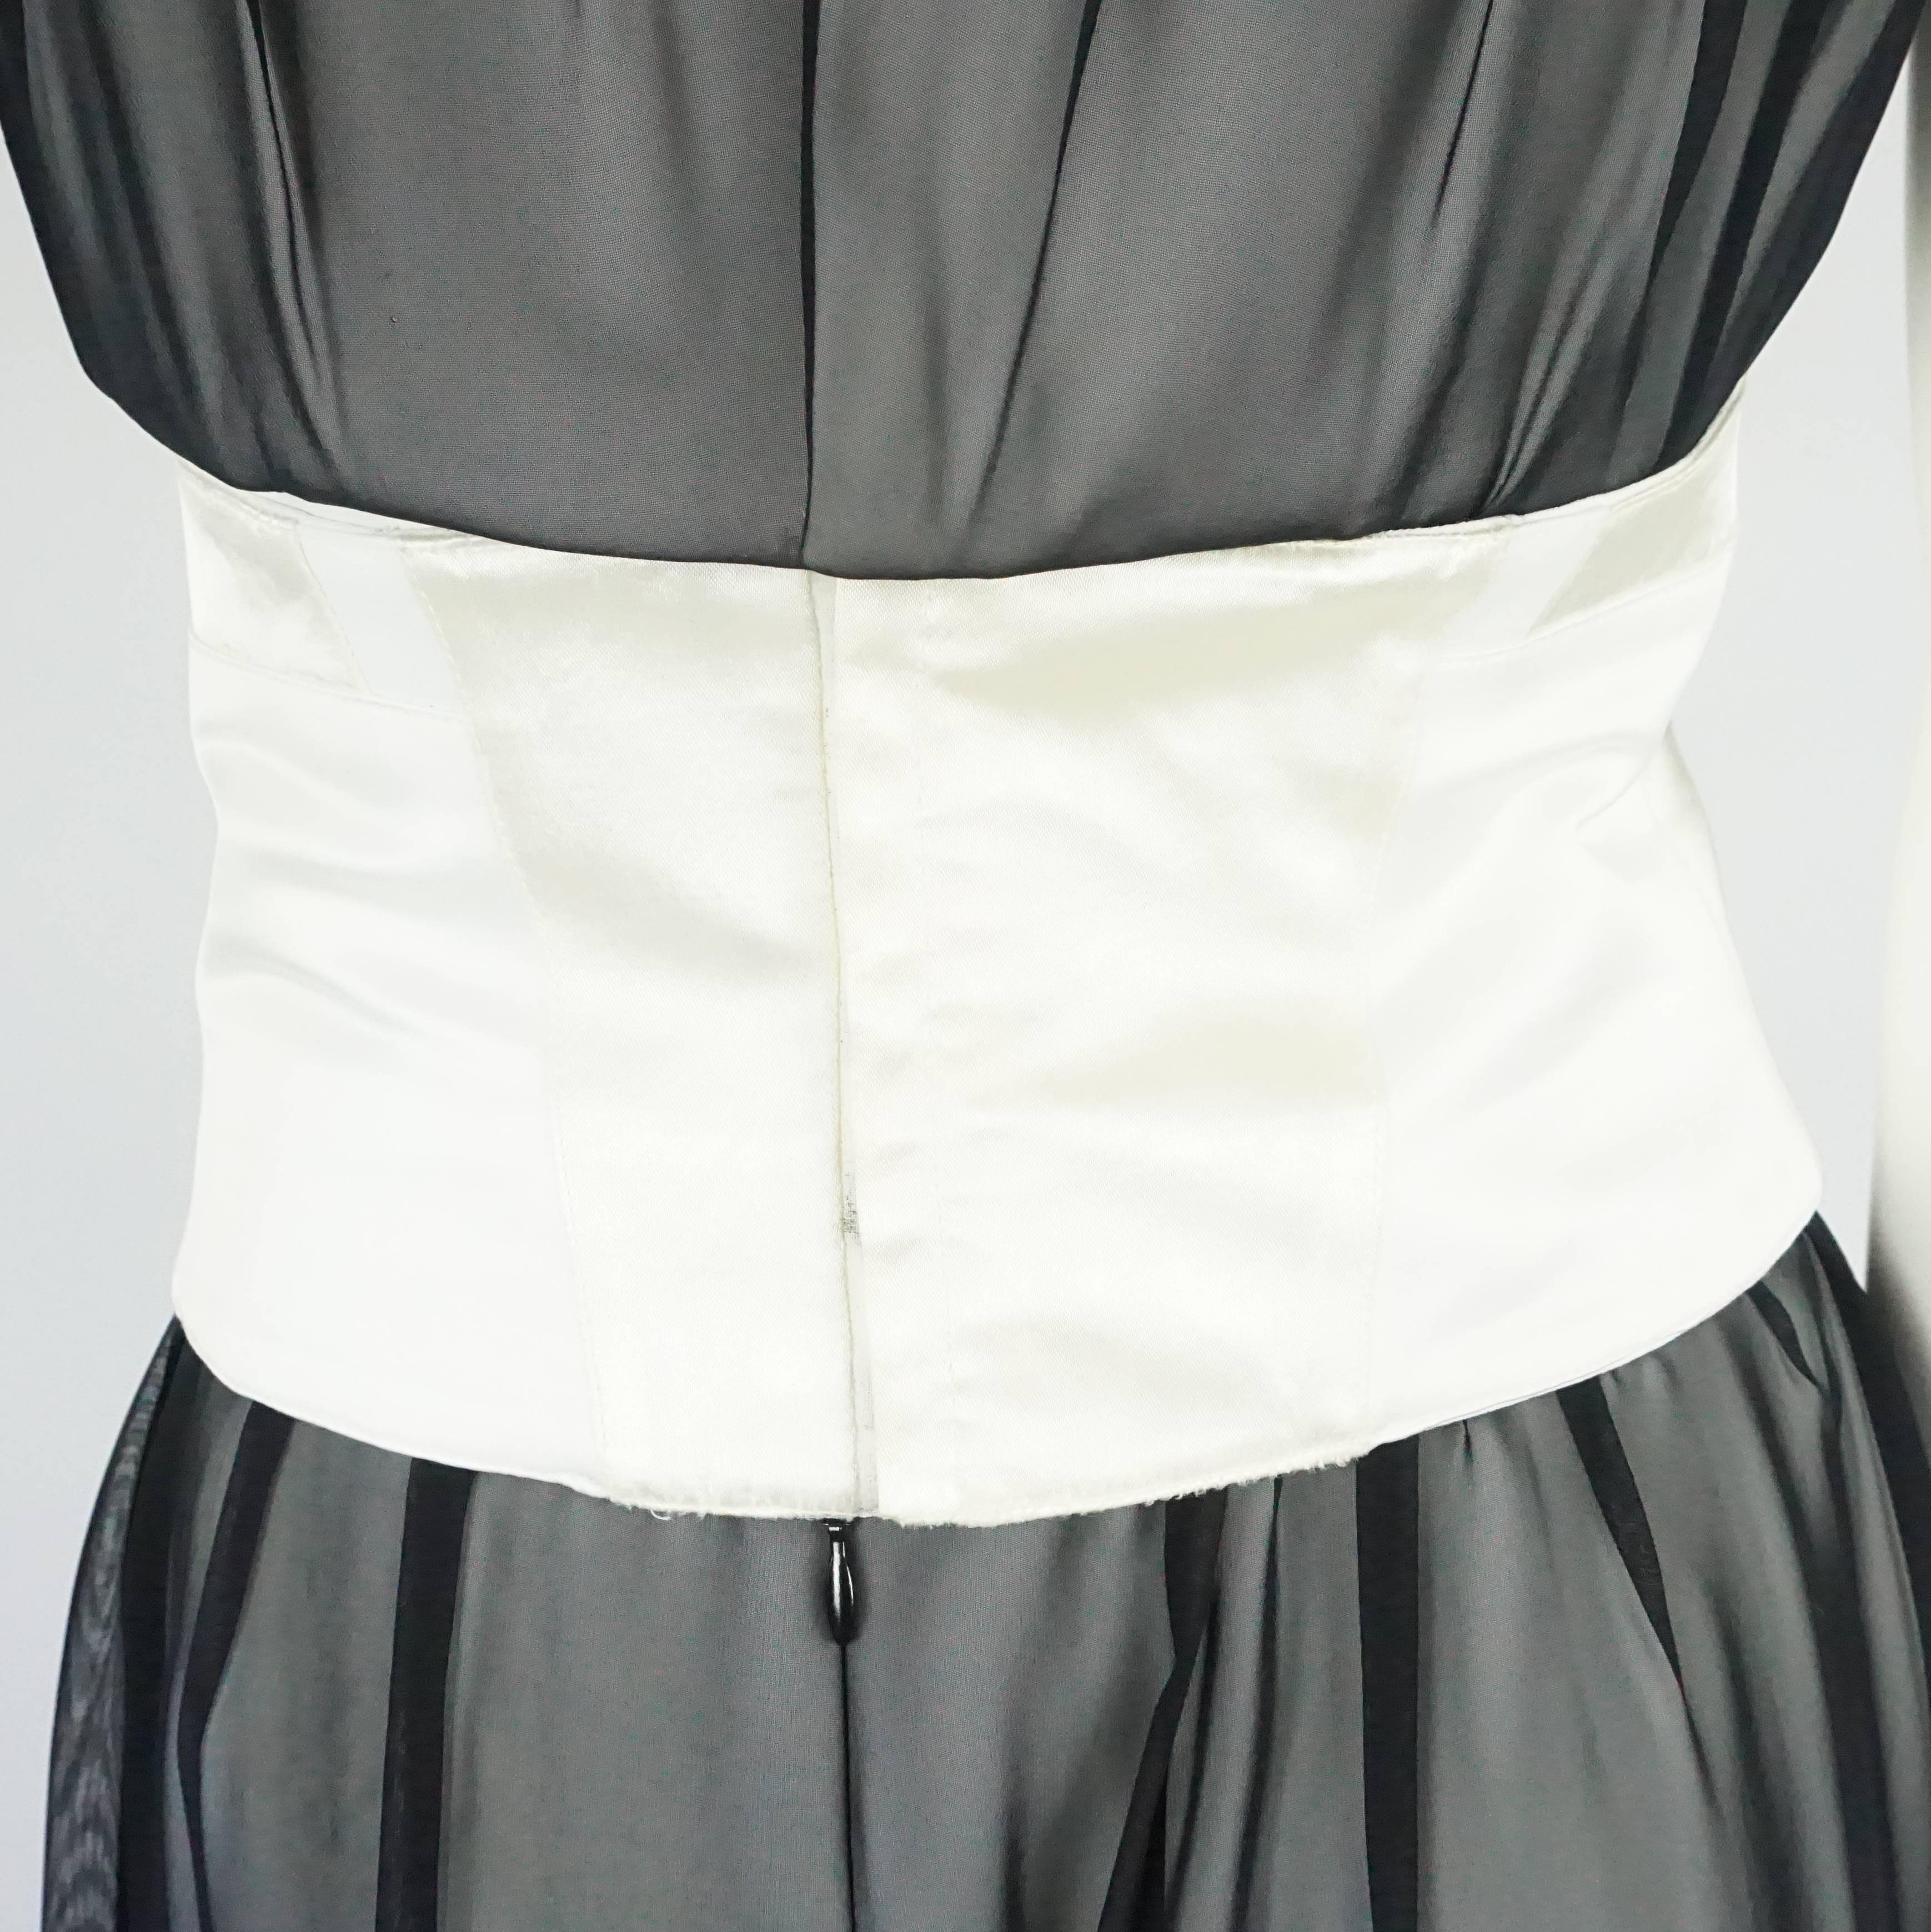 Thierry Mugler Black / White Palazzo Pants Cropped Bustier and Belt, Circa 1980s 1